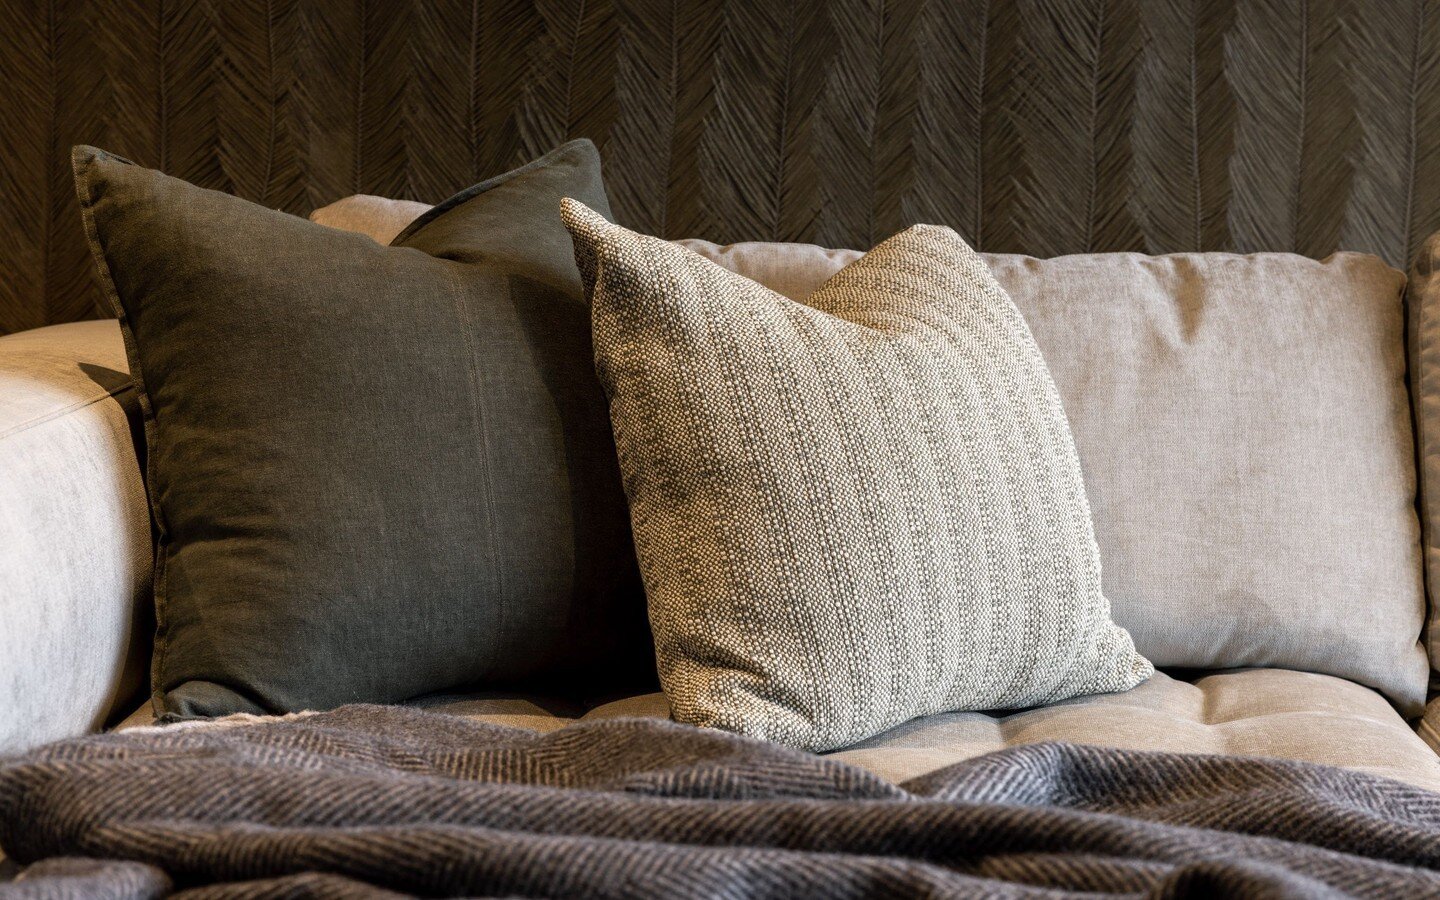 Soft furnishings  bring the element of warmth to any living space. The quality of different textures in fabrics bring a feel of comfort, richness, and warmth to spaces.
This makes your home an enjoyable space to be in

Cushions and throw @weavehomenz